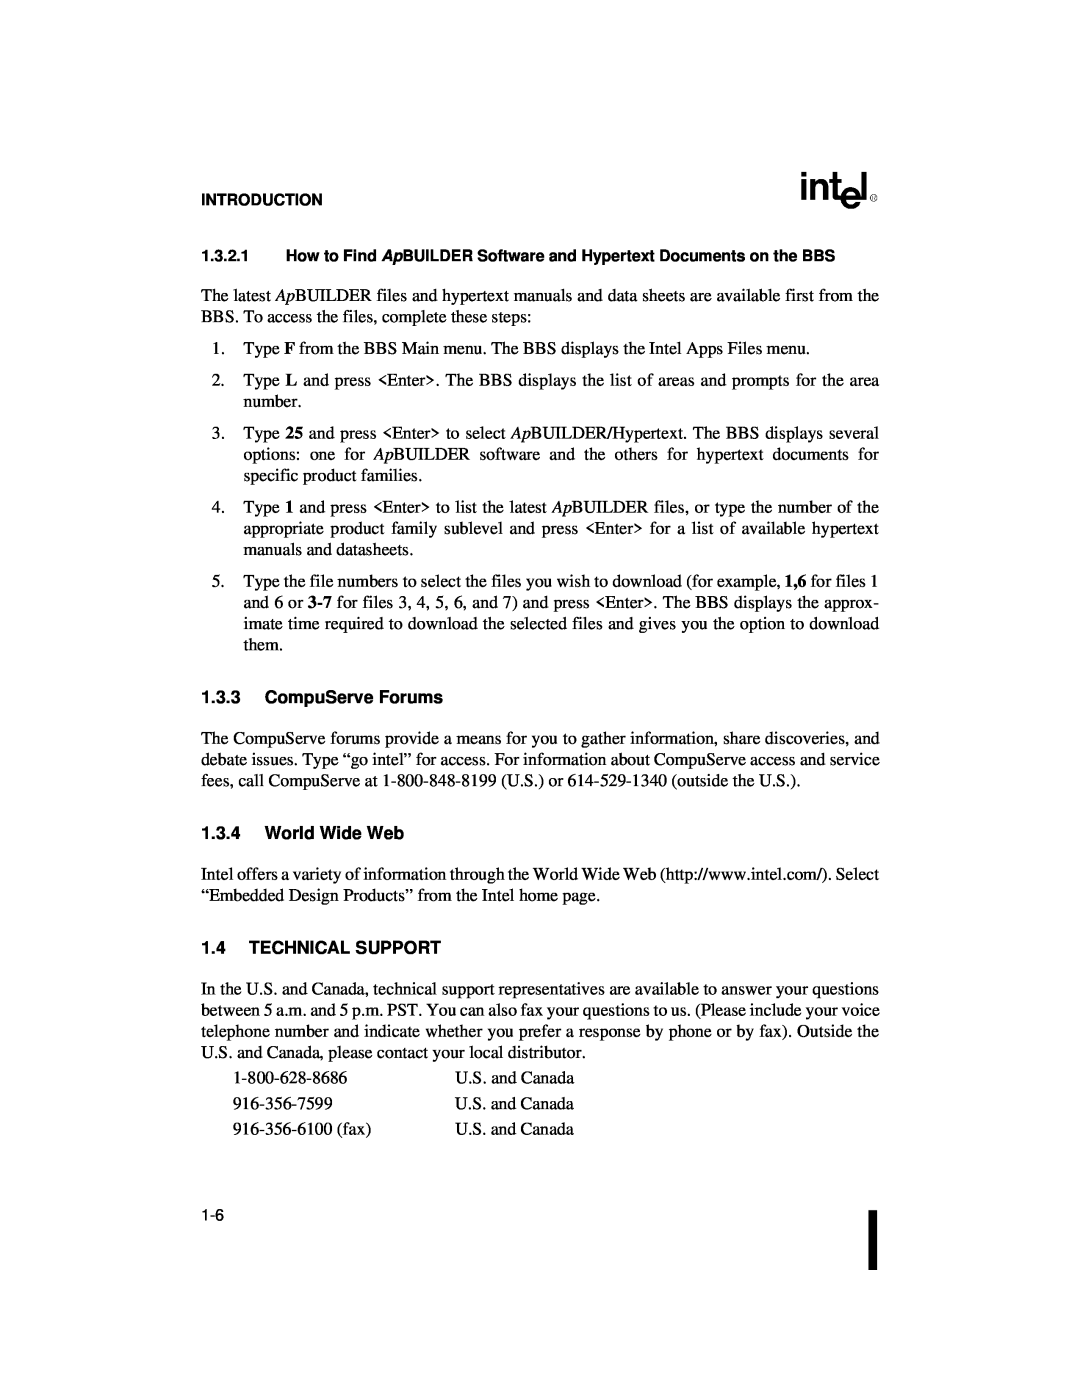 Intel 80C186XL, 80C188XL user manual 1.3.3CompuServe Forums, 1.3.4World Wide Web, 1.4TECHNICAL SUPPORT 